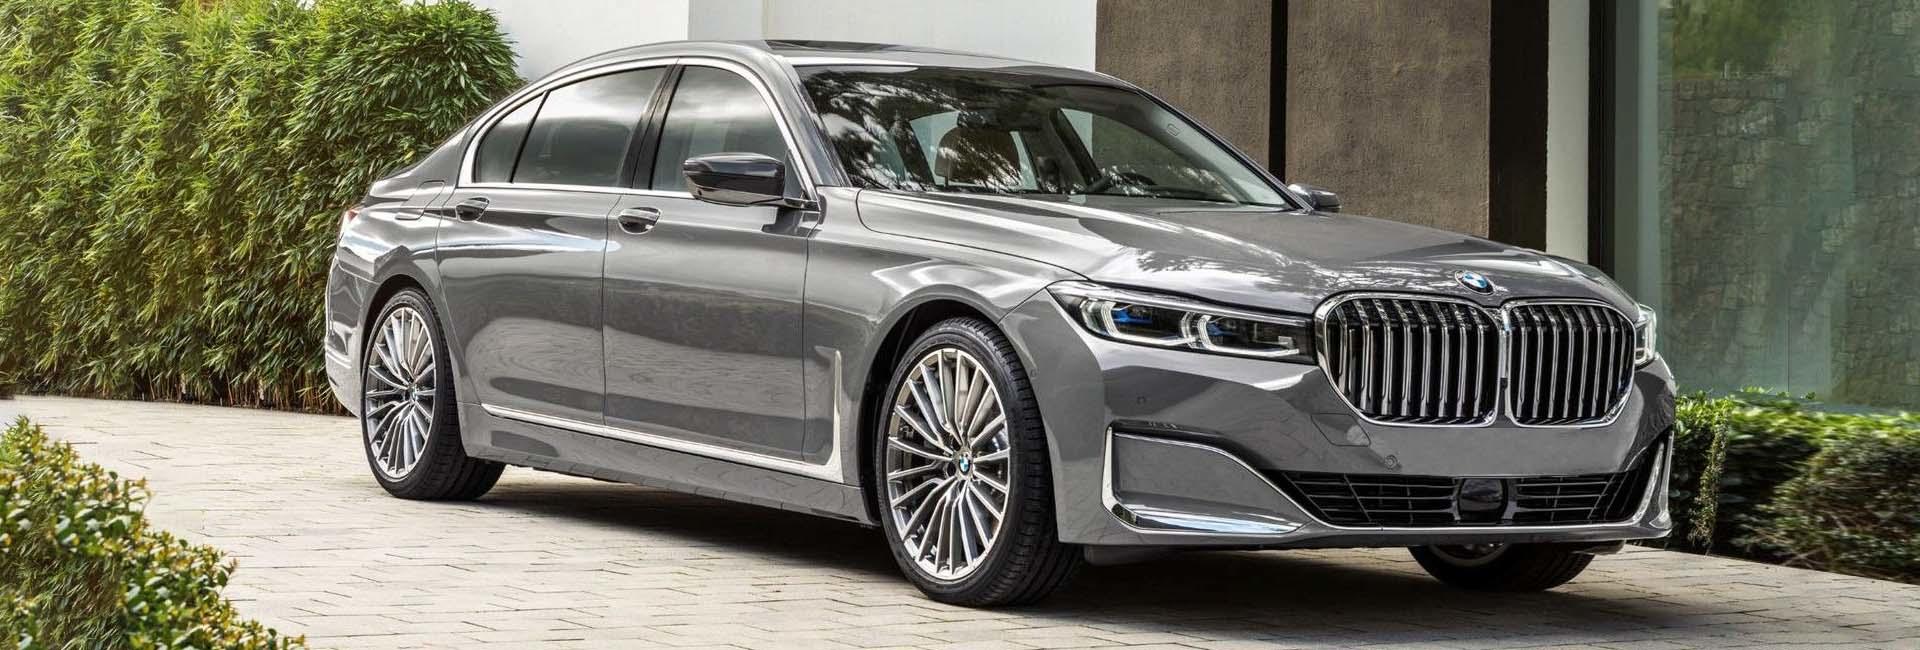 Front View of Gray BMW 7 Series